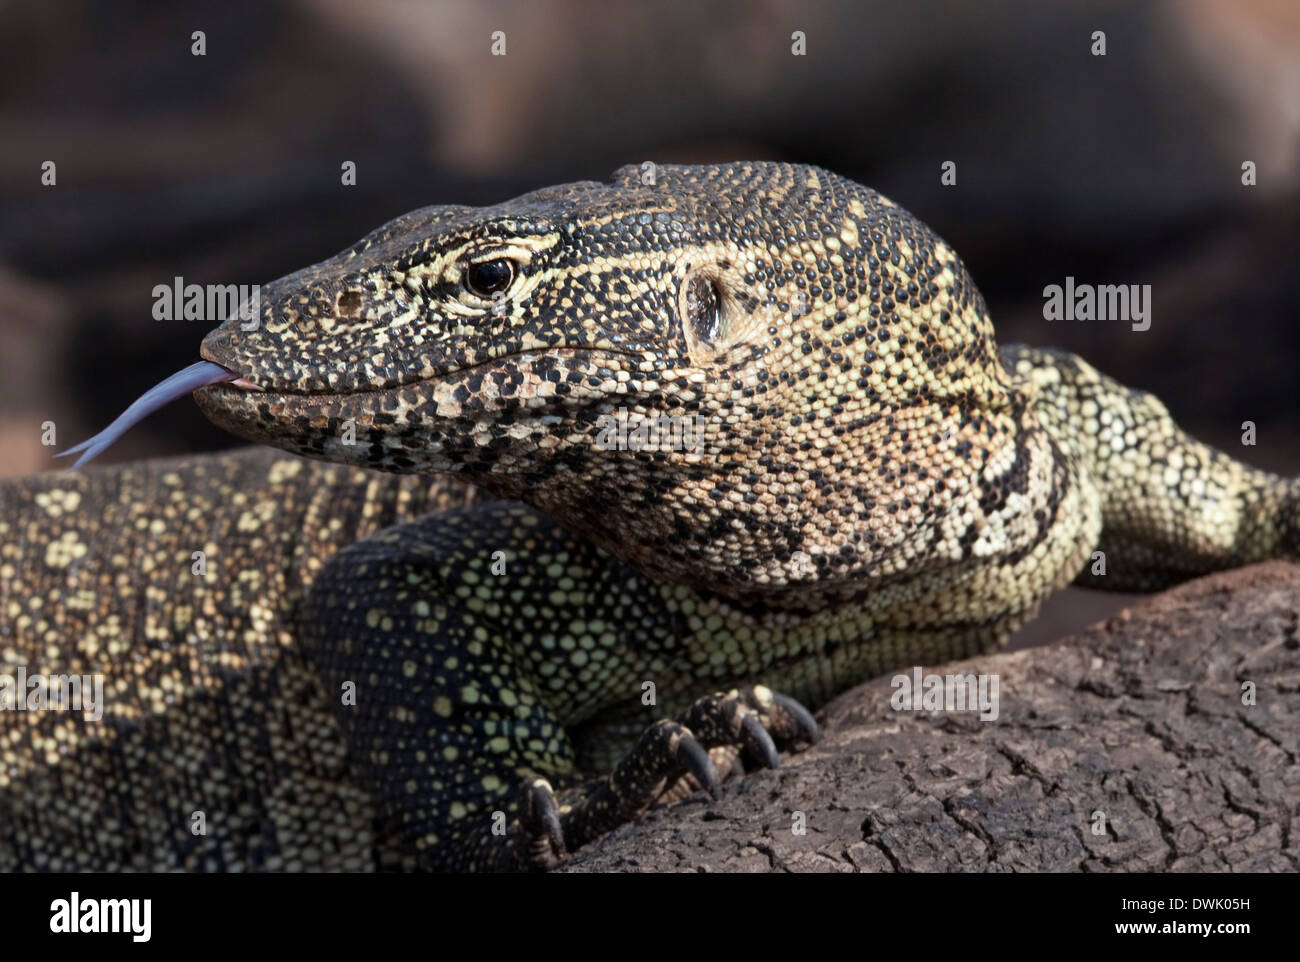 A Water Monitor (Varanus niloticus) on the banks of the Chobe River in northern Botswana Stock Photo